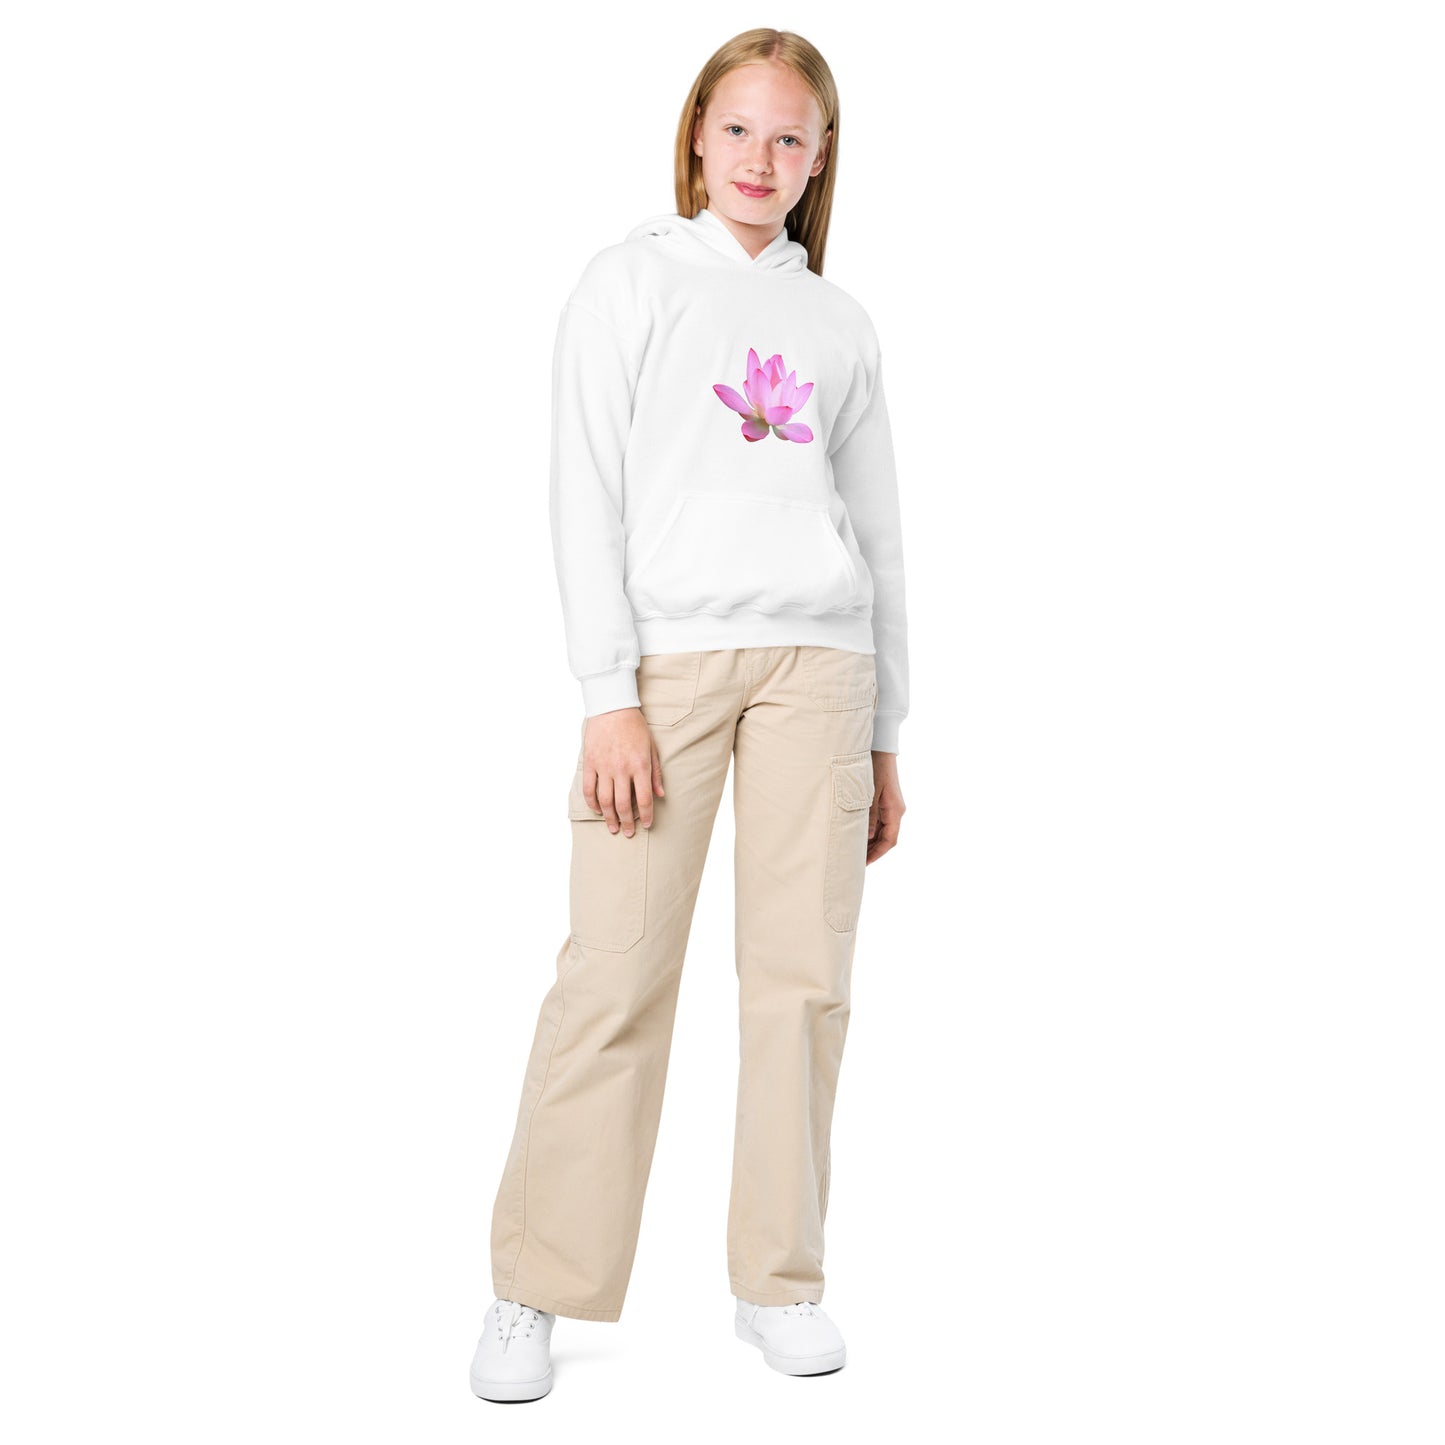 Lotus - Youth heavy blend hoodie ~ Sharon Dawn Collection